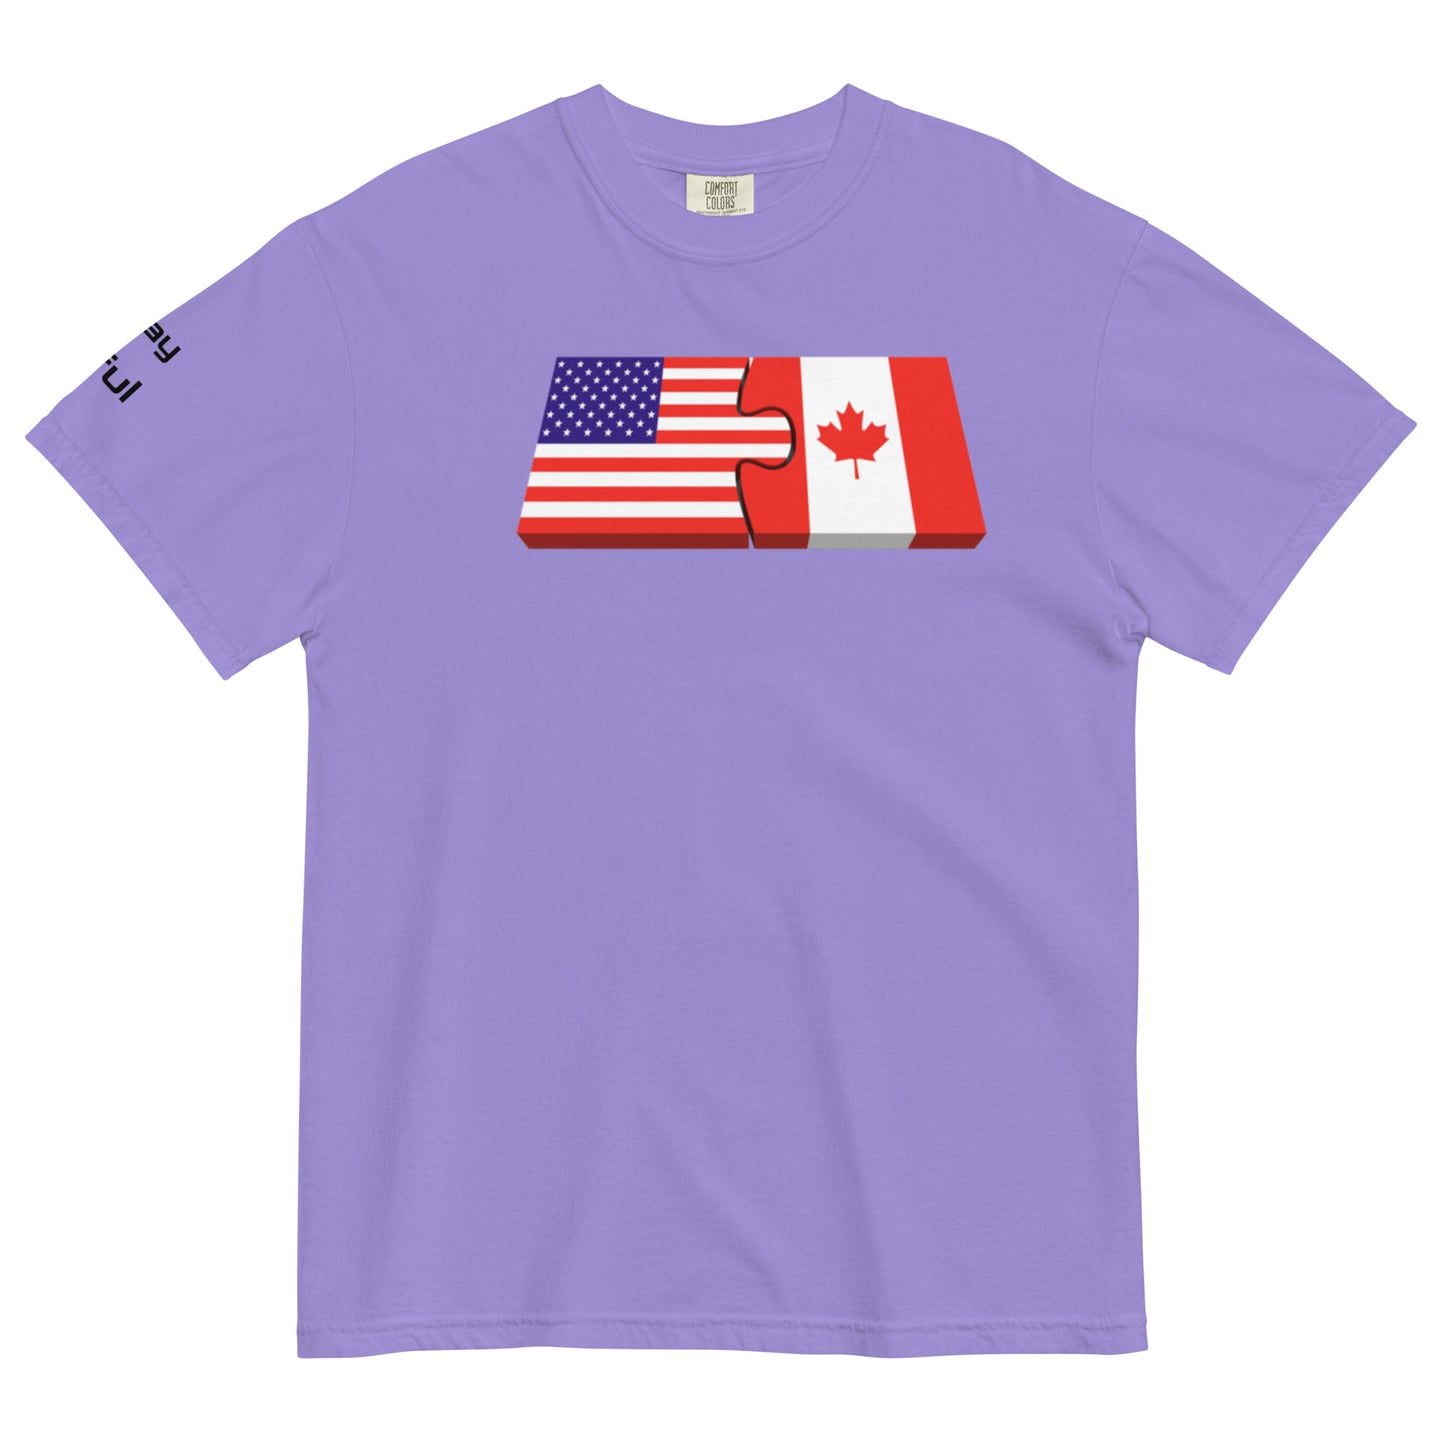 Unisex Red Cotton American/Canadian Flag Unison  garment-dyed heavyweight Peaceful t-shirt S-4XL